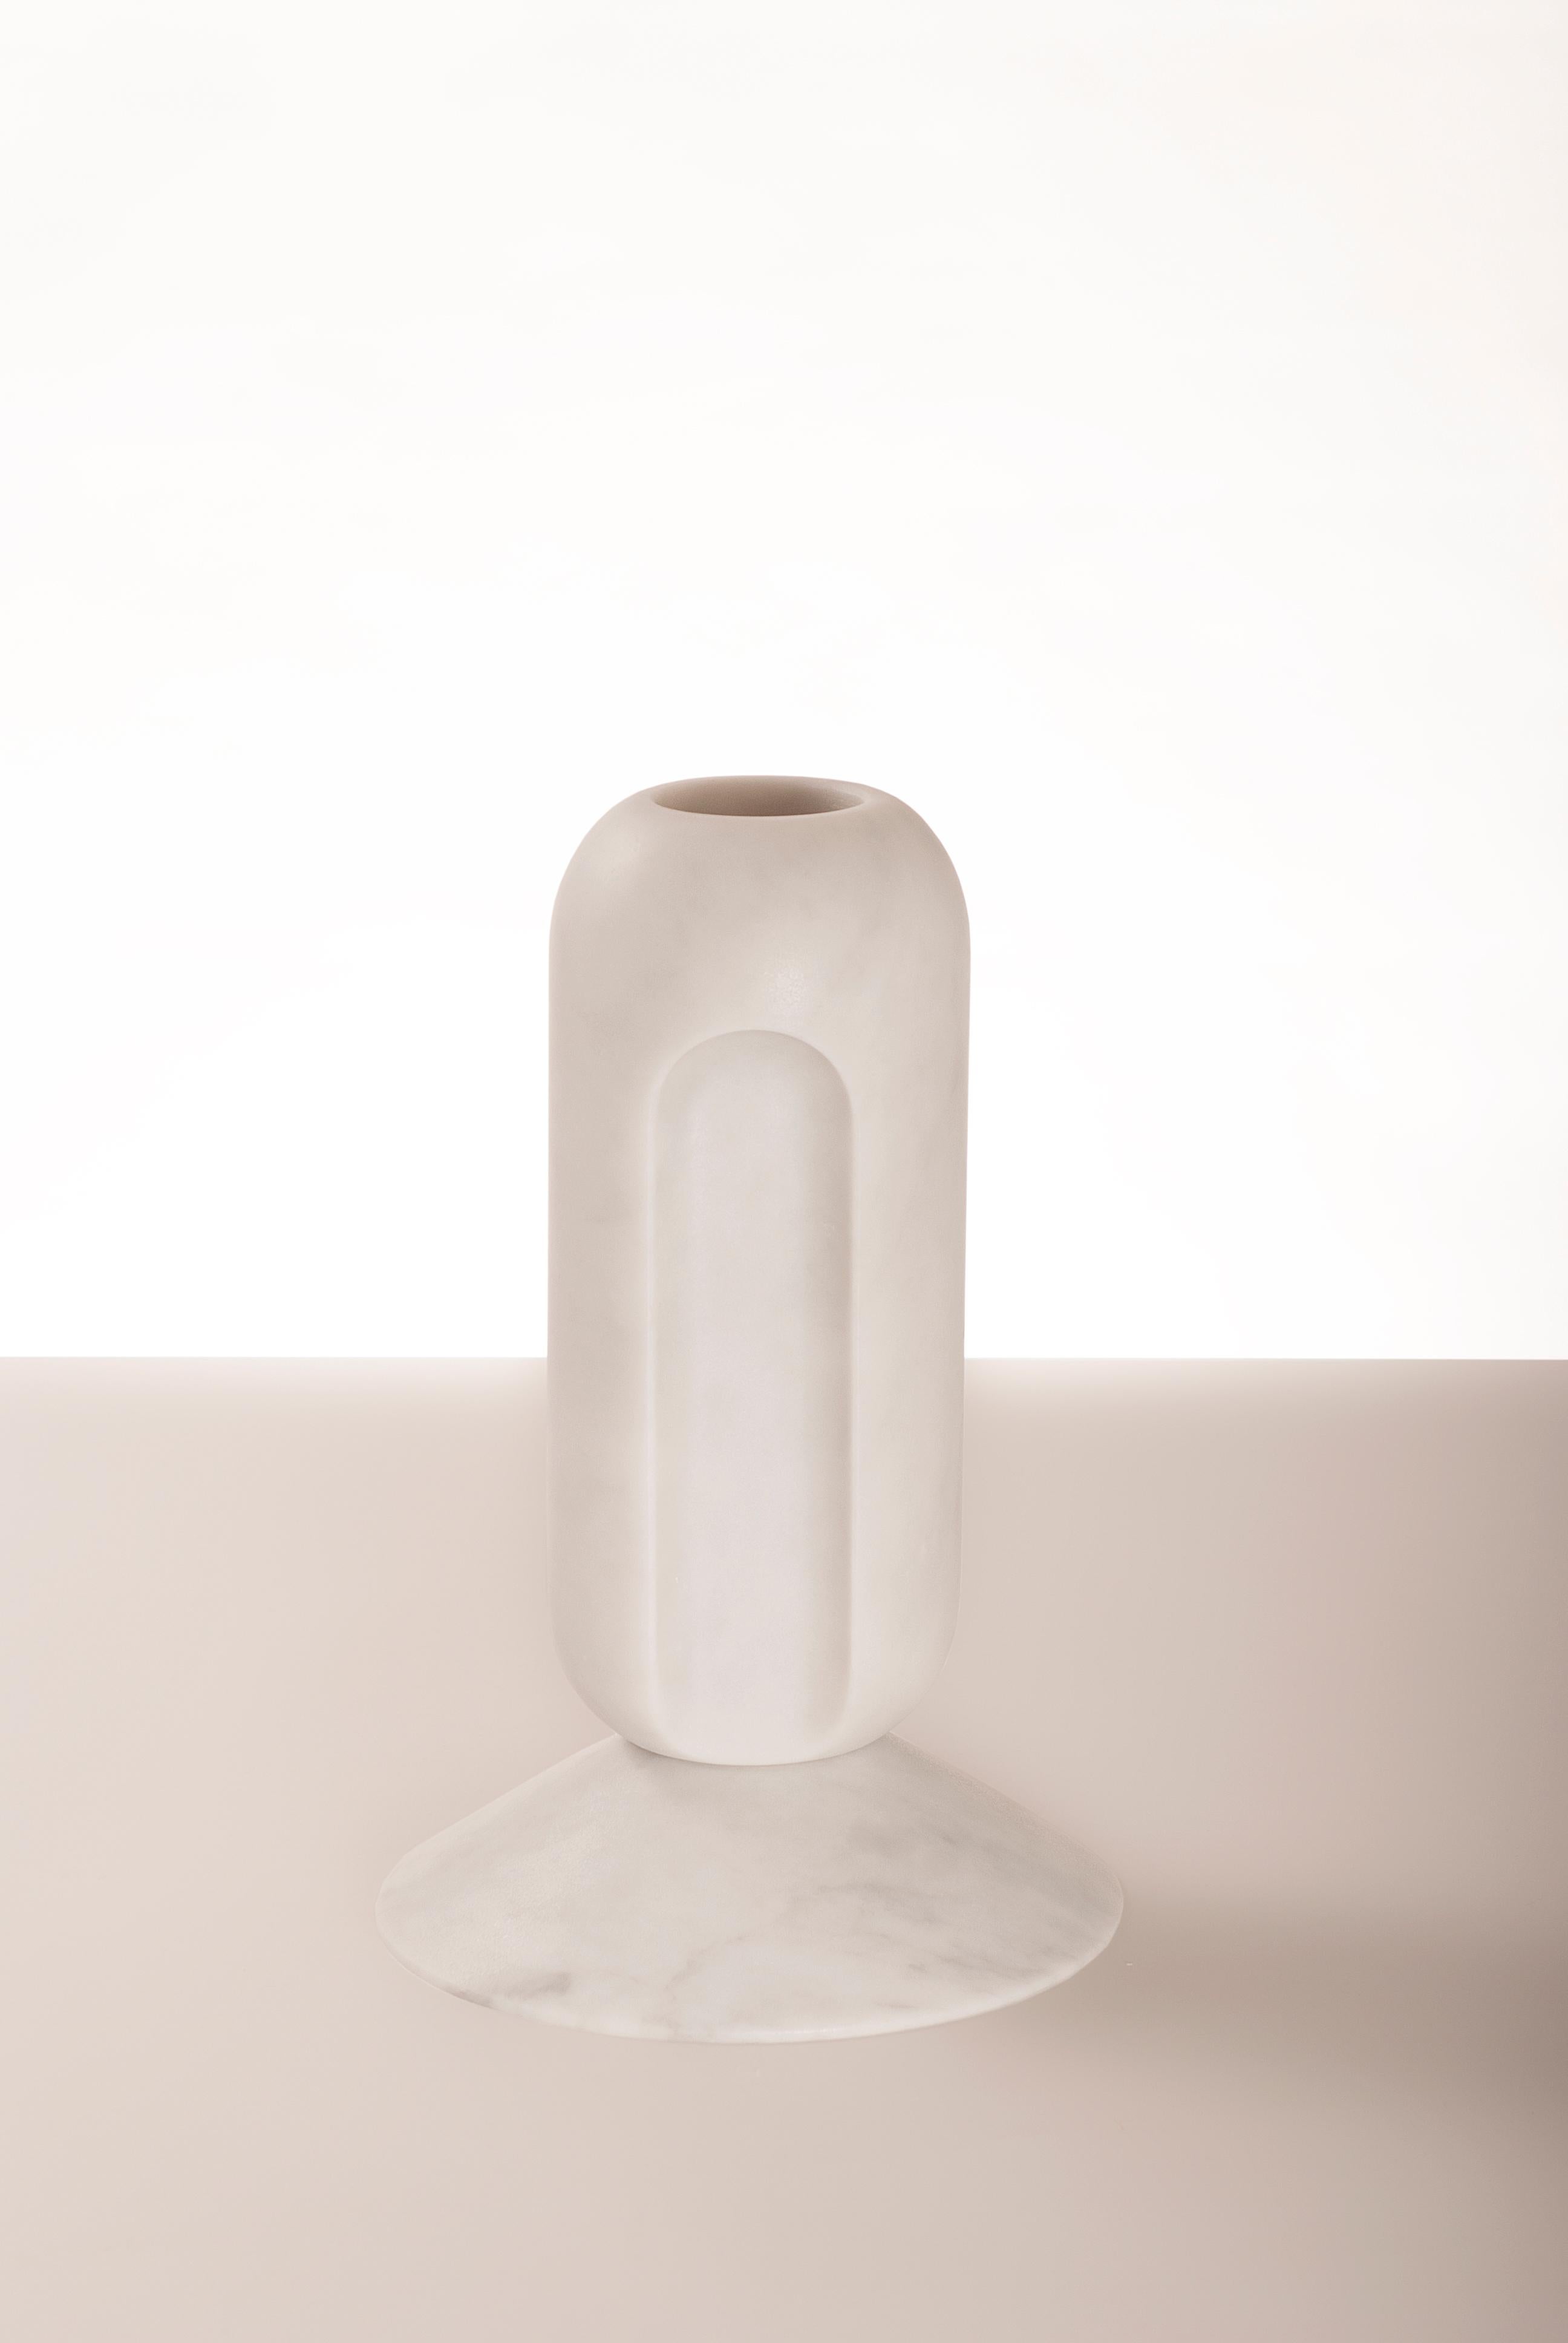 Cassus - Marble contemporary vase, Valentina Cameranesi
Materials: White Carrara marble (Also available in noir antique and green jade )
Dimensions: 36 x 24 x 24 cm.

The “Avalon” series consists of 3 sculptural vases, made of white Arabescato